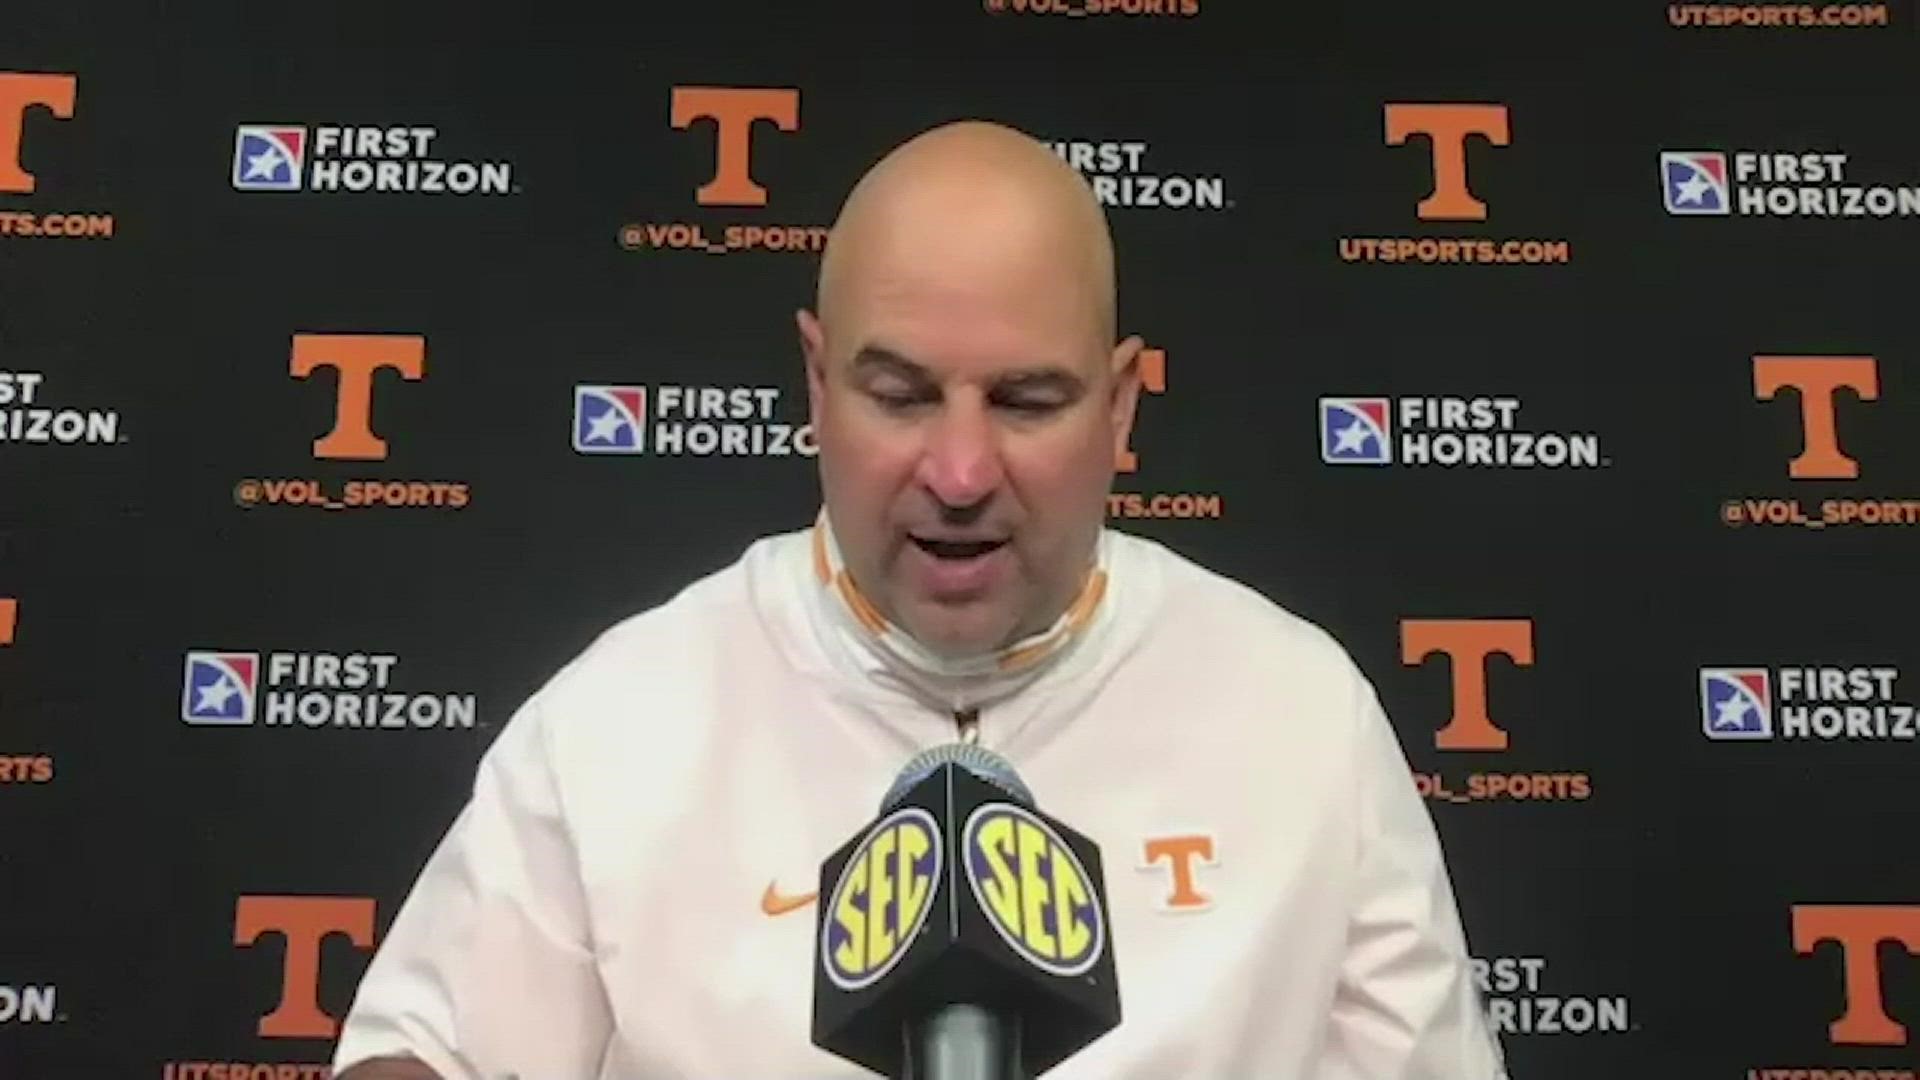 Tennessee head coach Jeremy Pruitt speaks with the media after the team's 31-27 win against South Carolina.